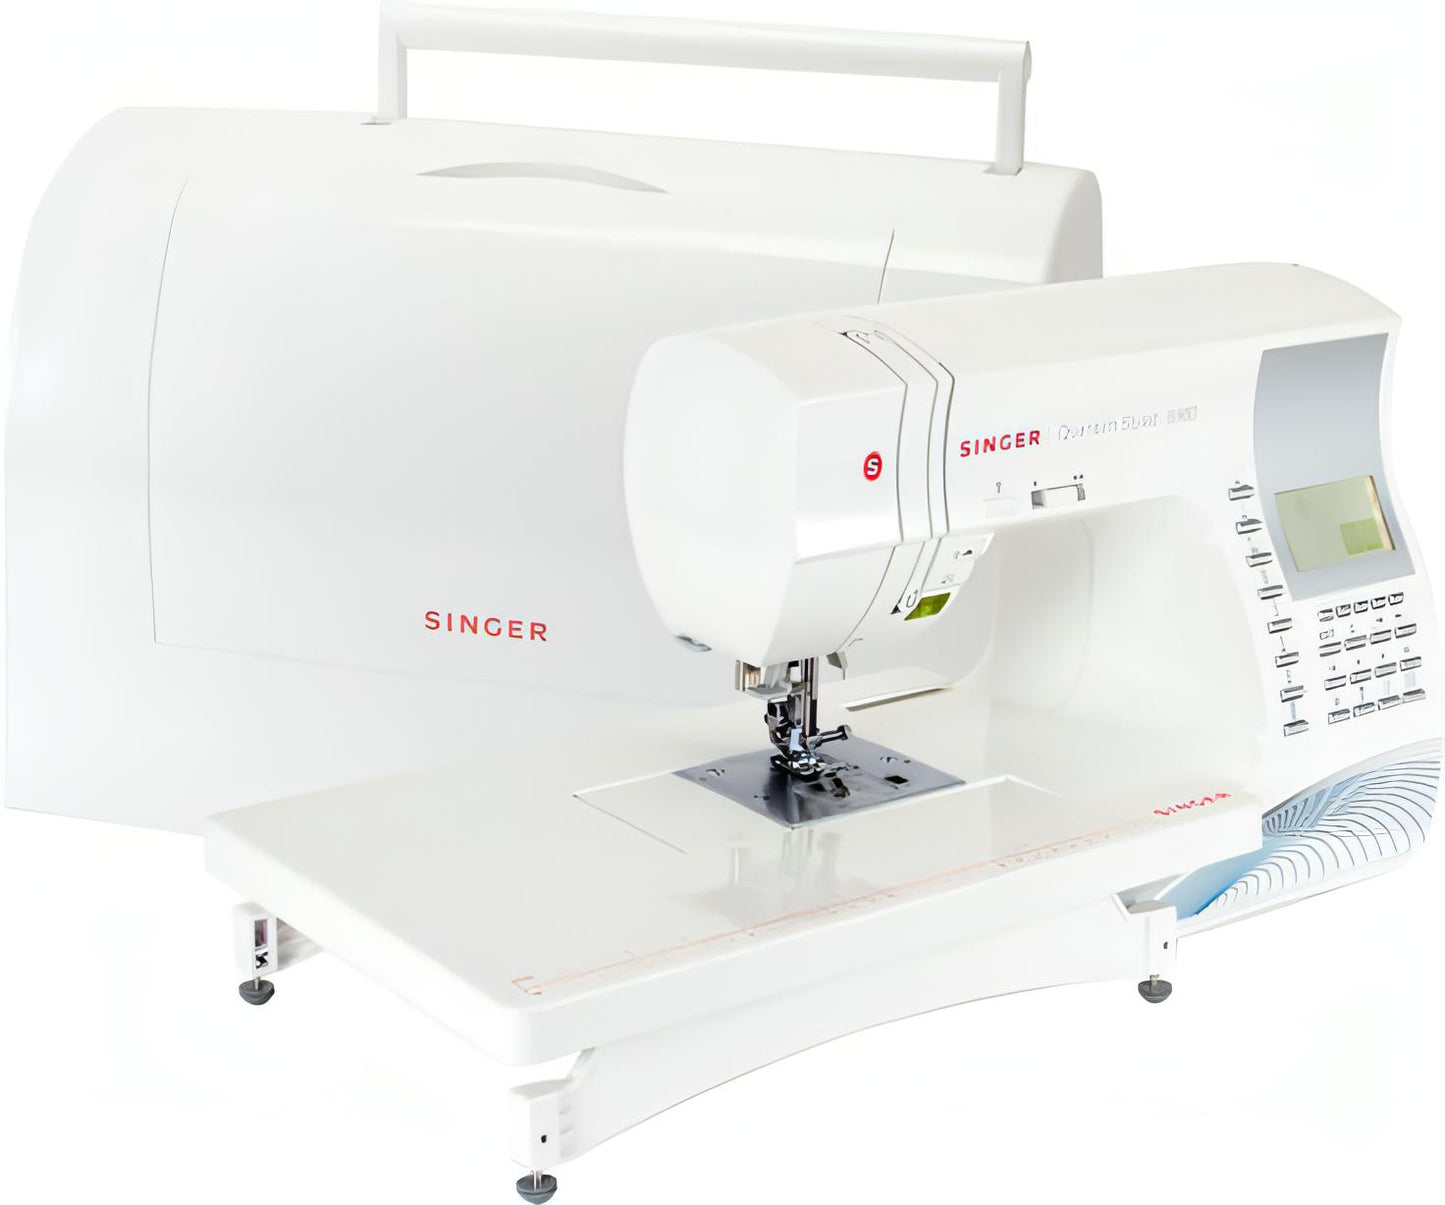 Singer Quantum Stylist 9960 SE Sewing Machine with Auto thread cutter - SE edition with FREE Walking Foot and Side Cutter Overlocking Attachments worth £70